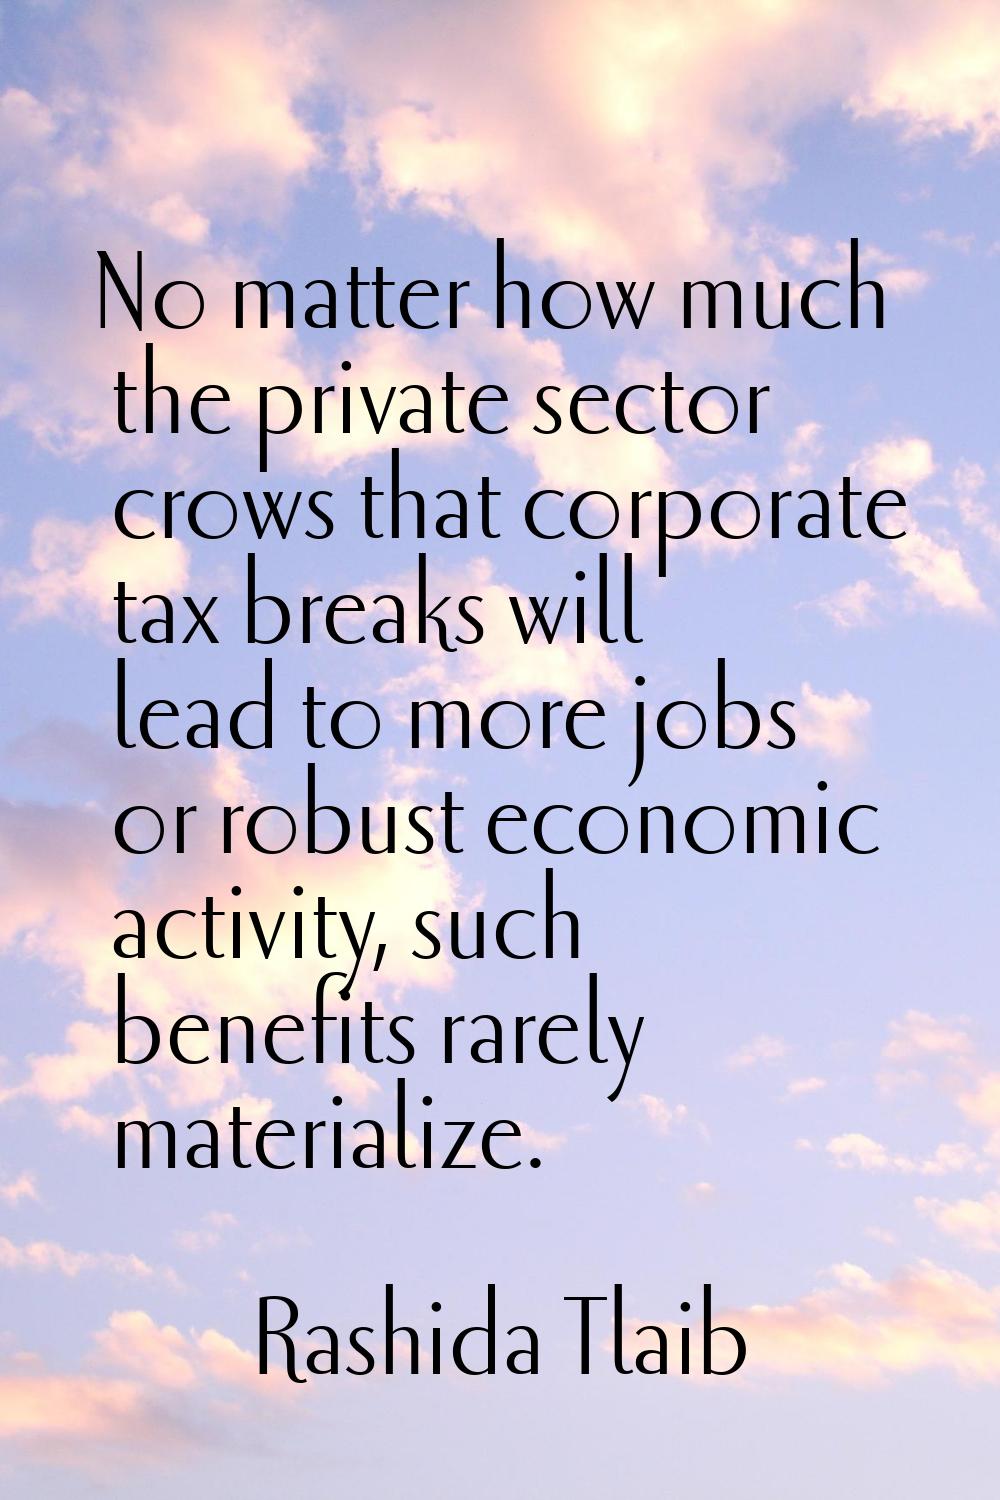 No matter how much the private sector crows that corporate tax breaks will lead to more jobs or rob